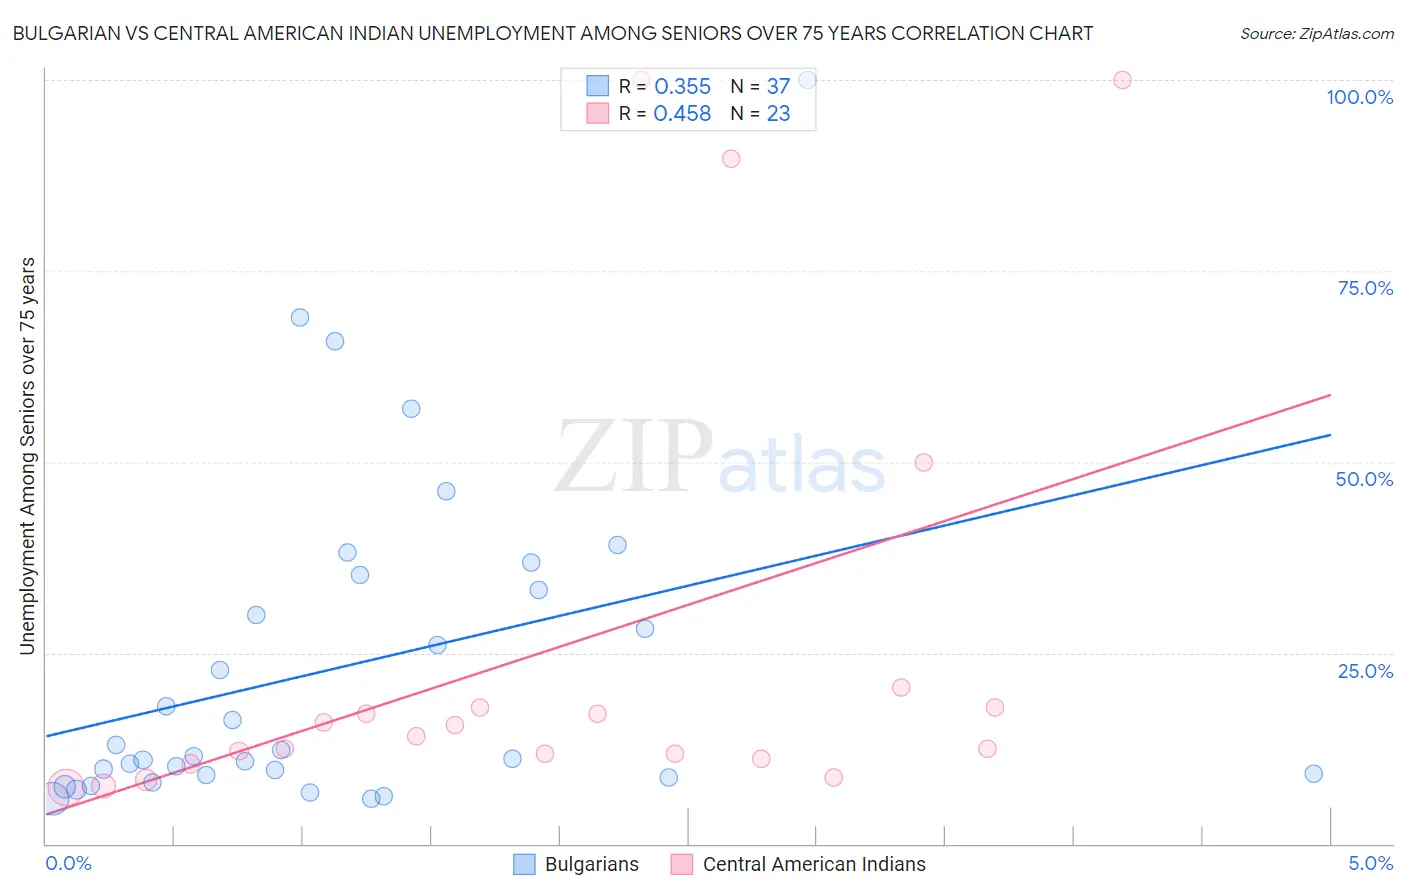 Bulgarian vs Central American Indian Unemployment Among Seniors over 75 years